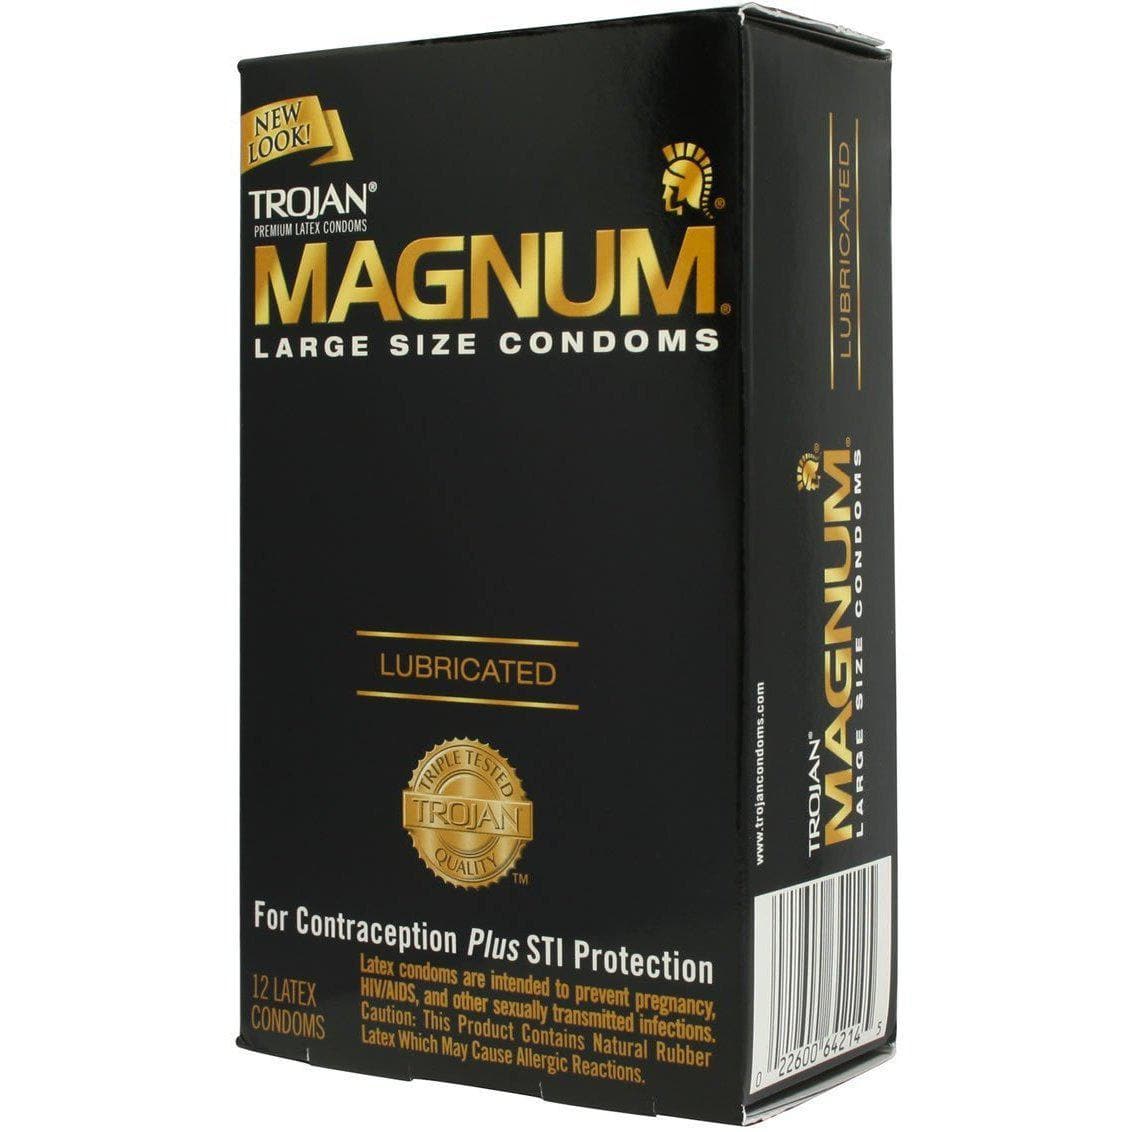 Trojan Condom Magnum Large Size Lubricated 12 Pack - Romantic Blessings